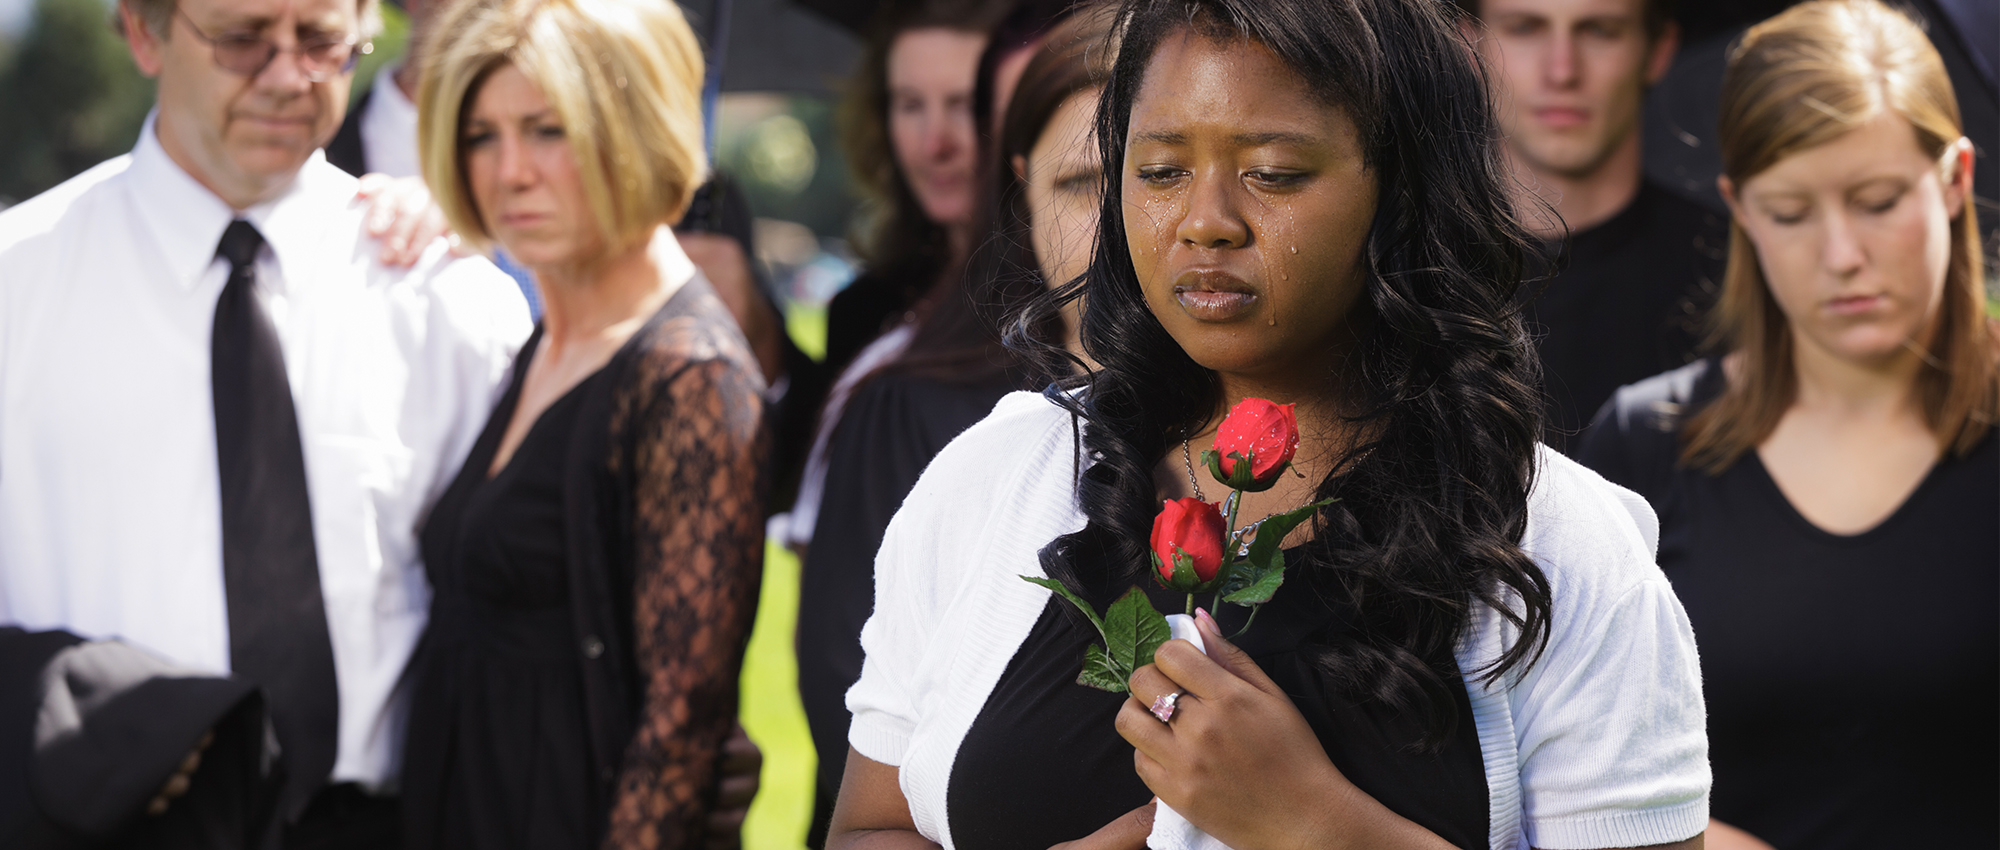 Woman mourns next to casket during ceremony.